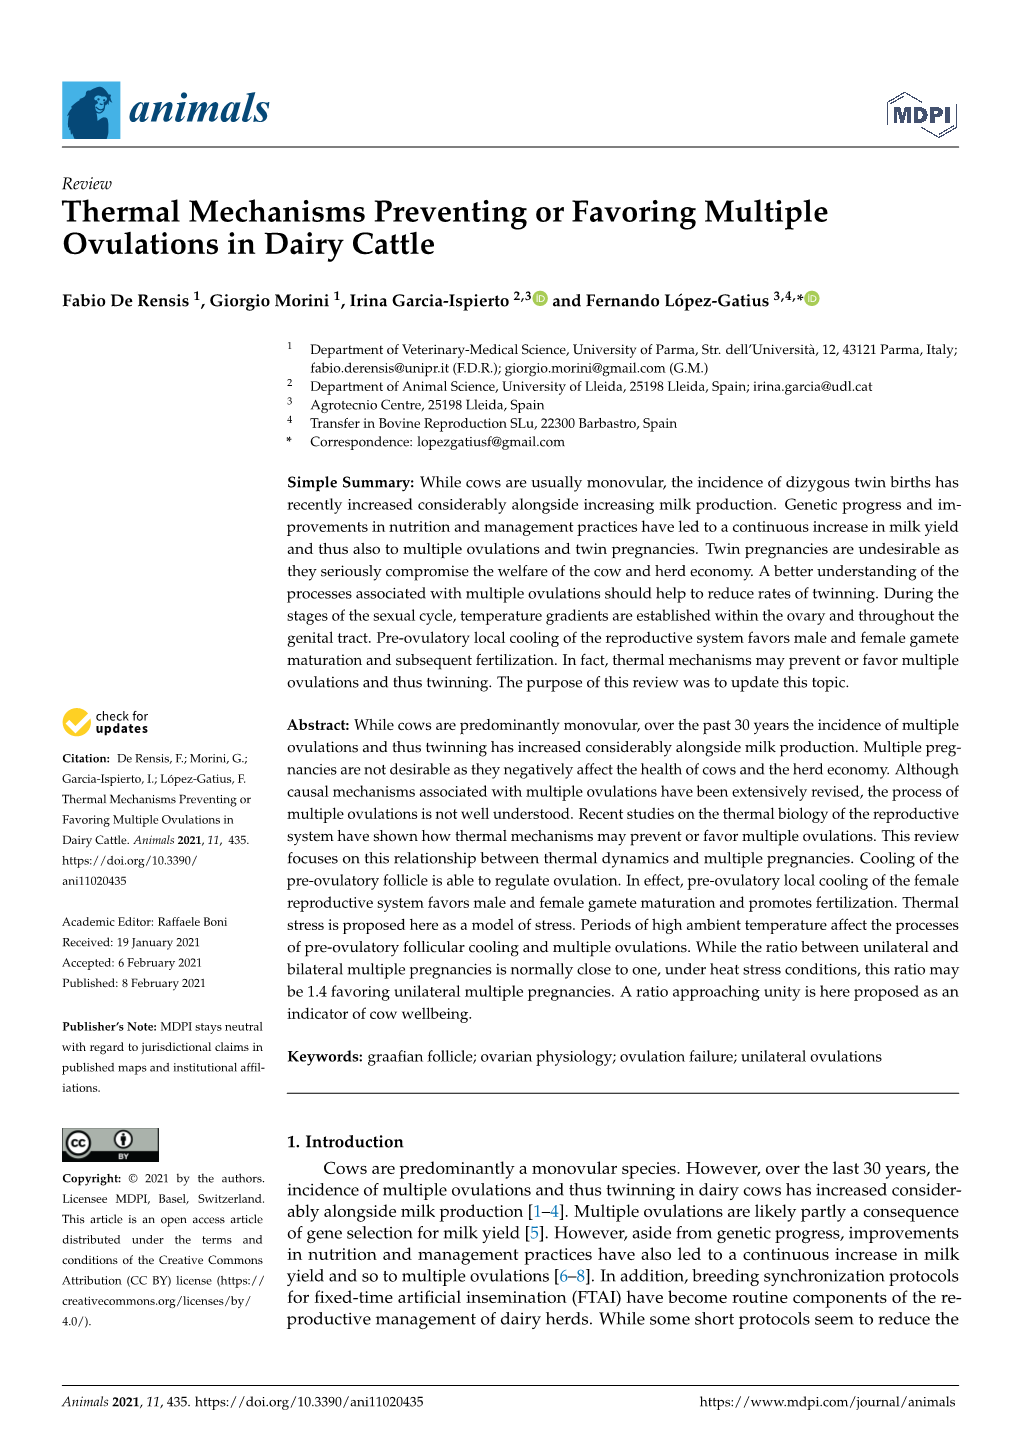 Thermal Mechanisms Preventing Or Favoring Multiple Ovulations in Dairy Cattle